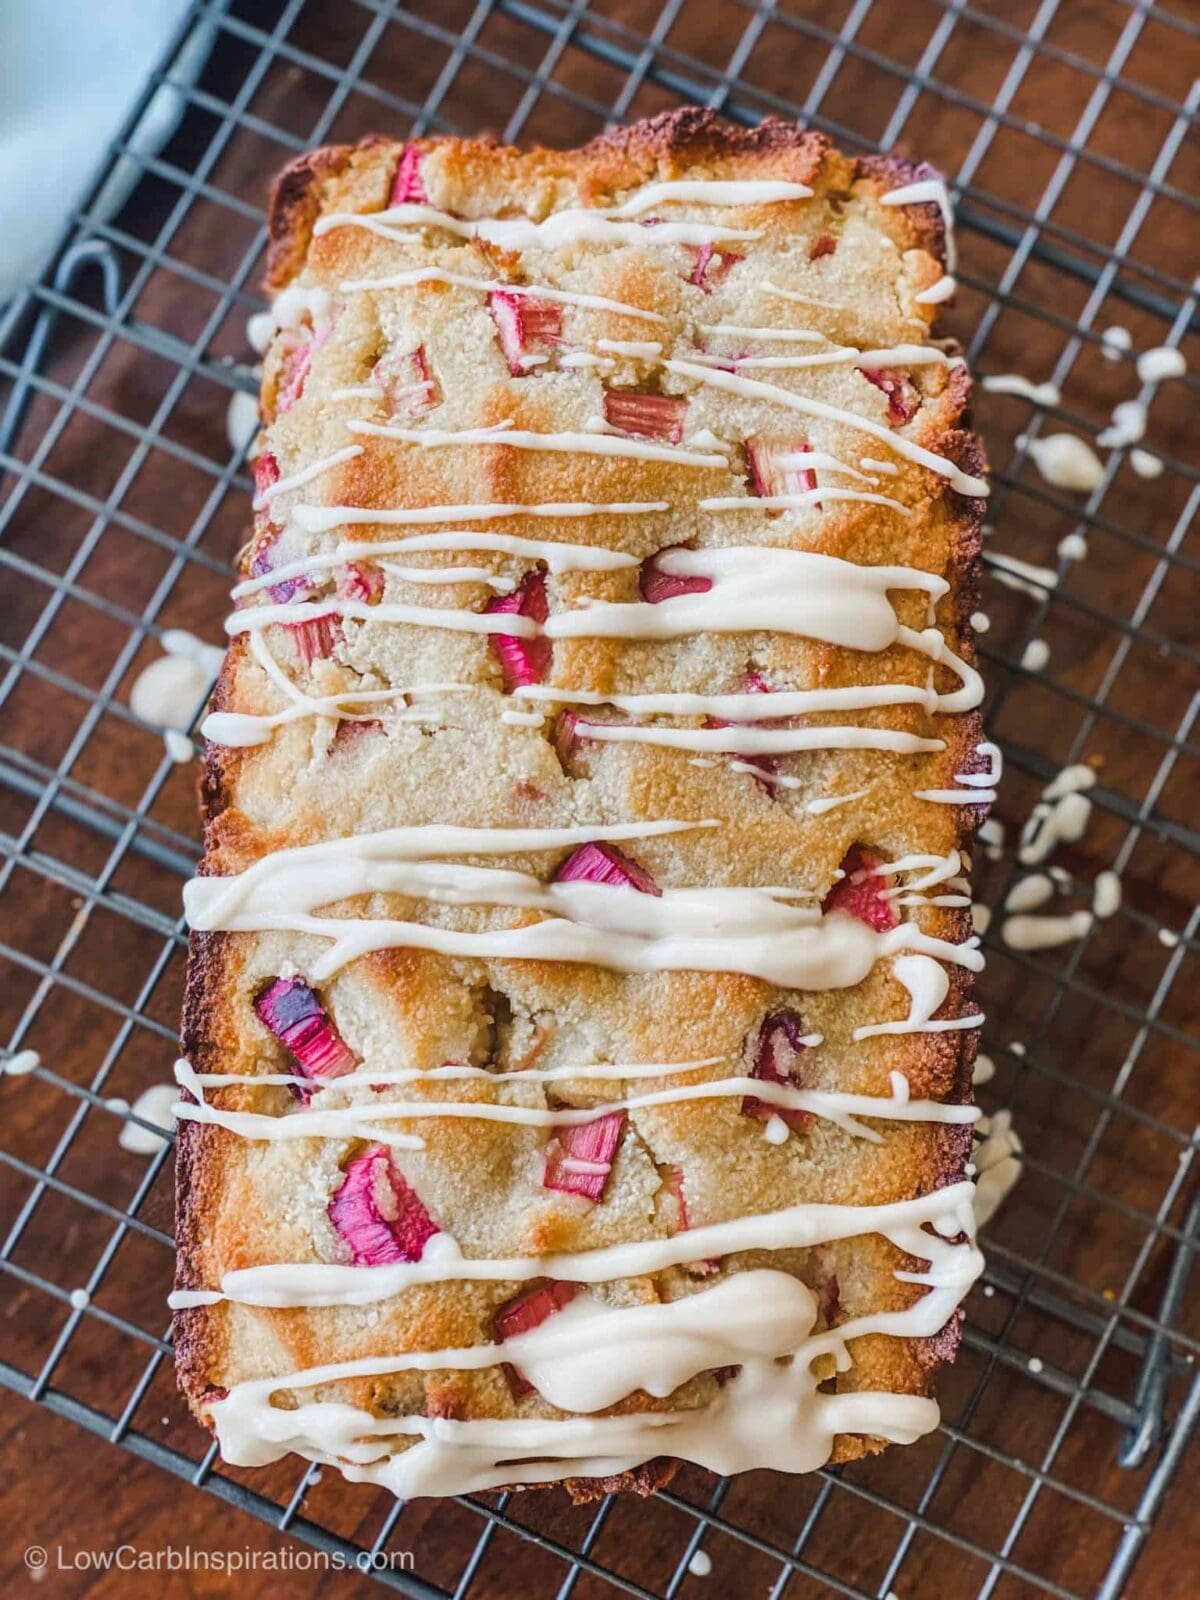 Keto-Rhubarb-Bread-Recipe-with-a-Glaze-Topping-7 lowcarbinspirations